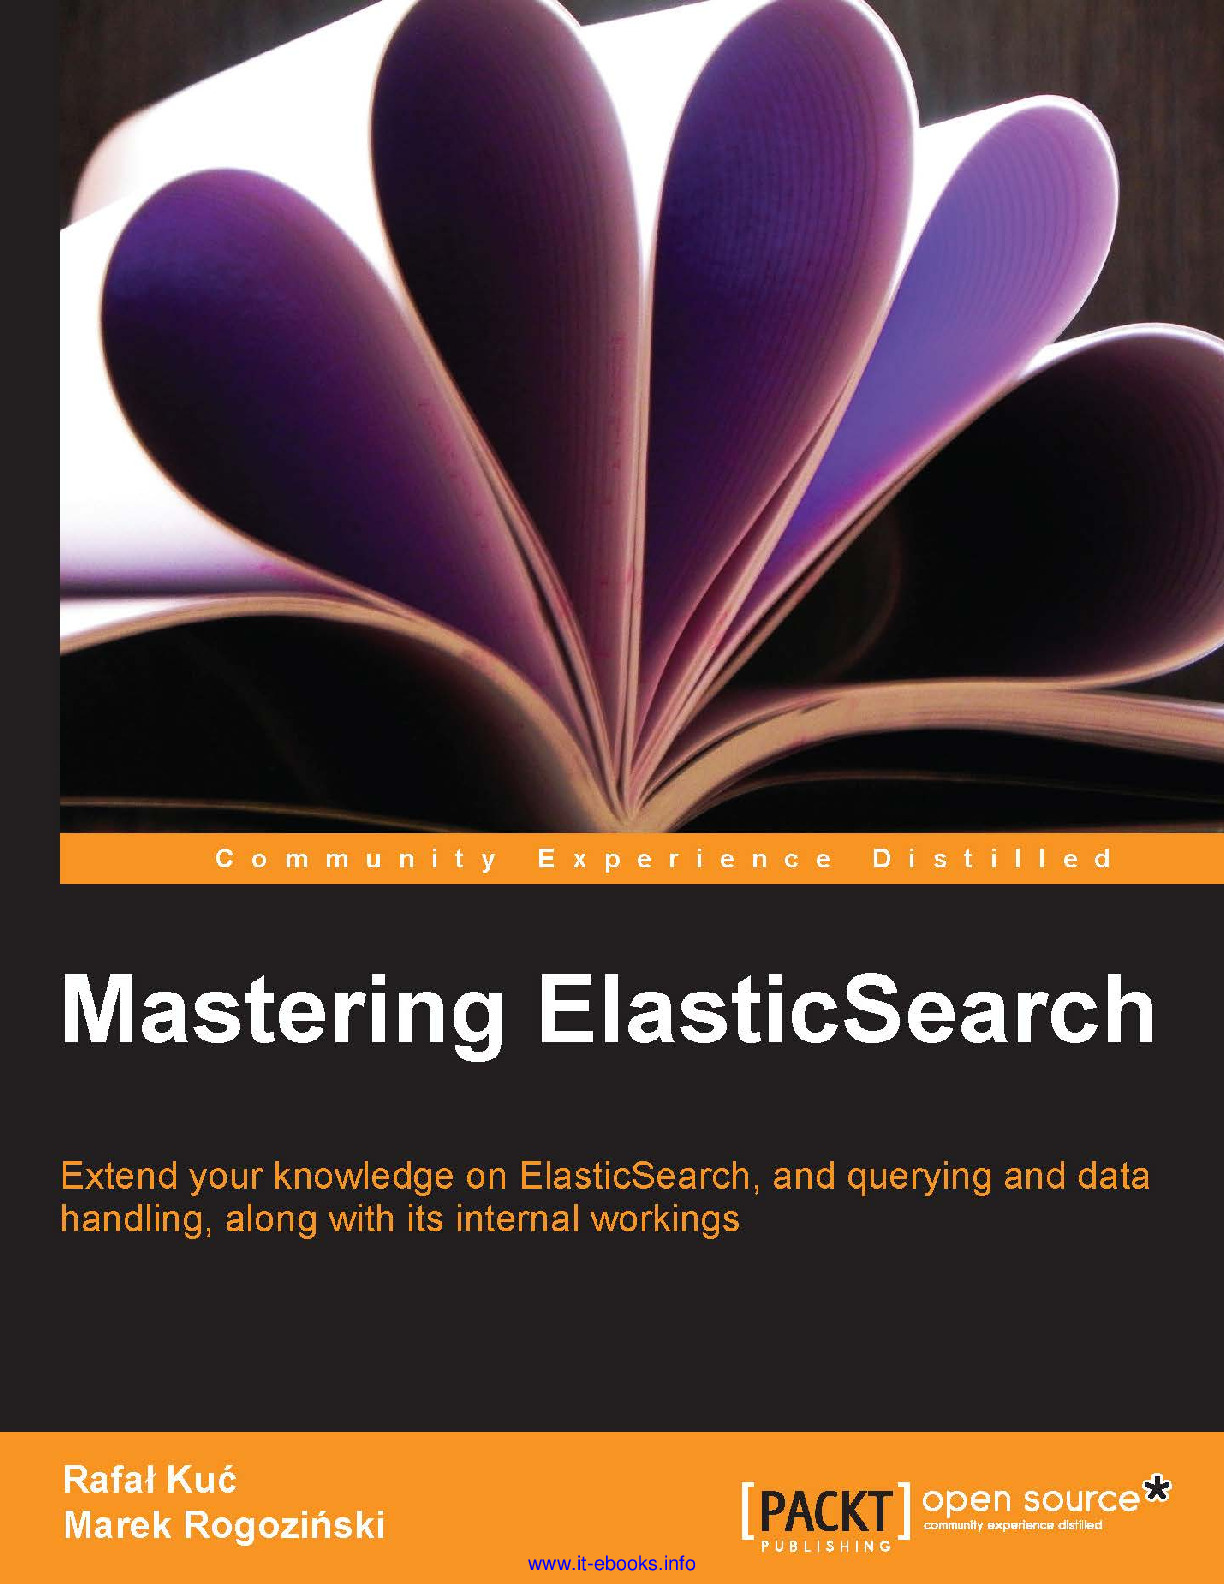 Mastering ElasticSearch – Extend your knowledge on ElasticSearch, and querying and data handling, along with its internal workings